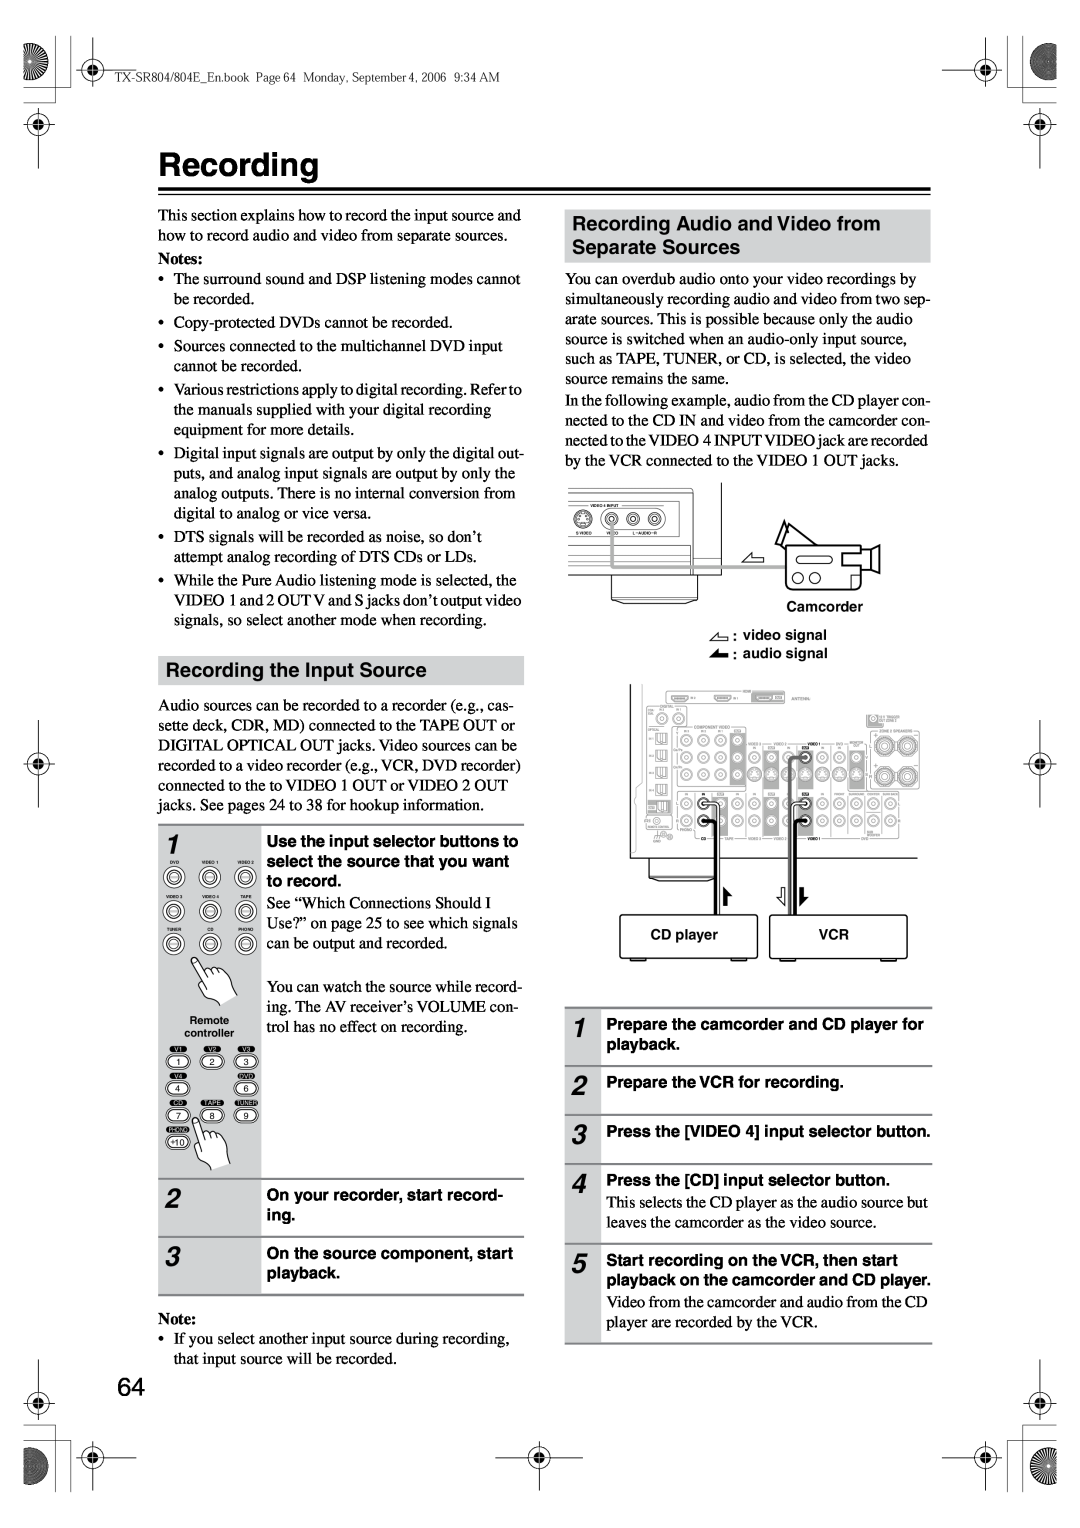 Onkyo TX-SR804E instruction manual Recording the Input Source, Recording Audio and Video from Separate Sources, Notes 